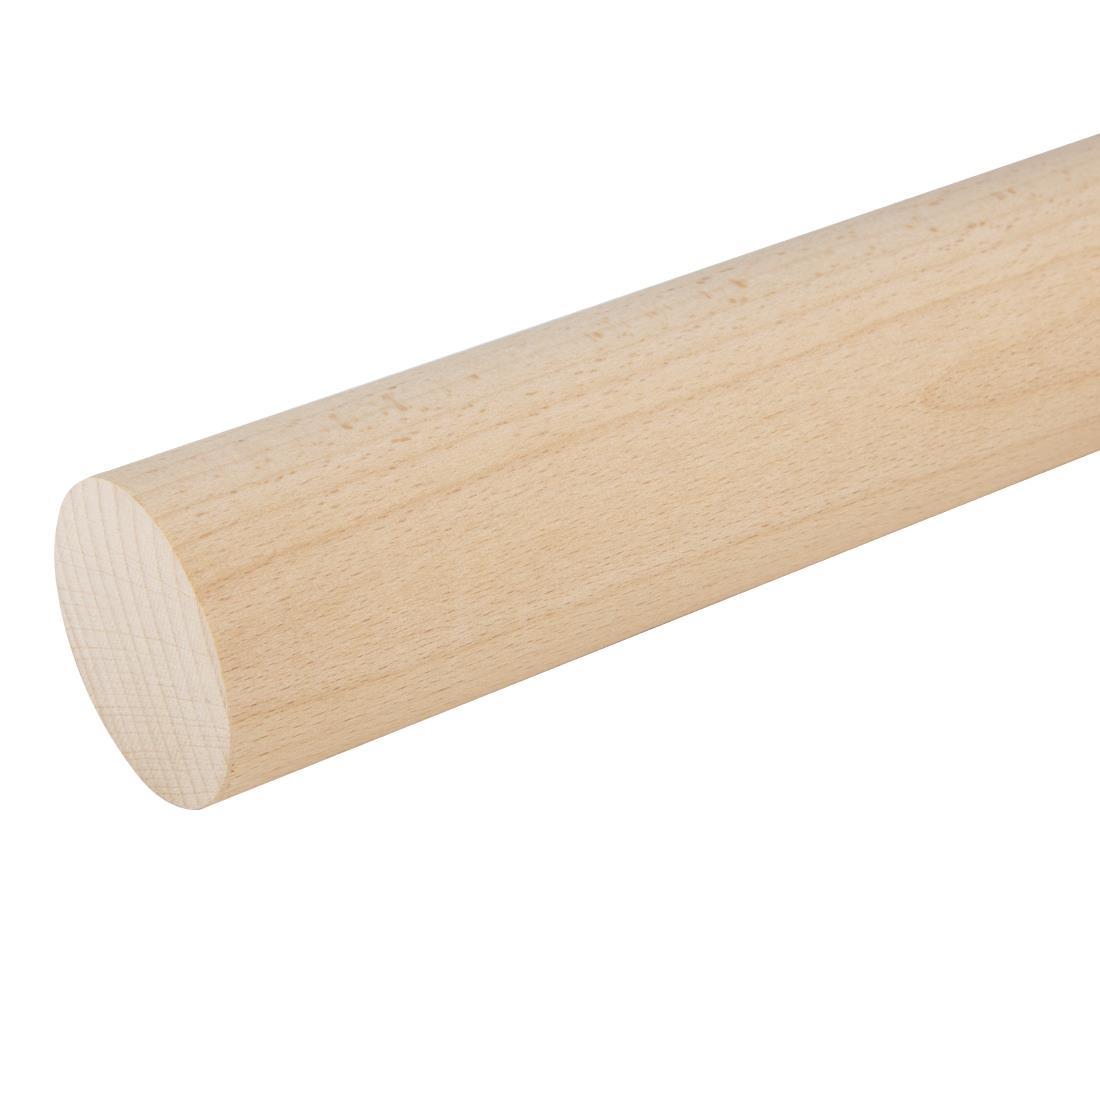 Vogue Wooden Rolling Pin 18" - J102  - 4